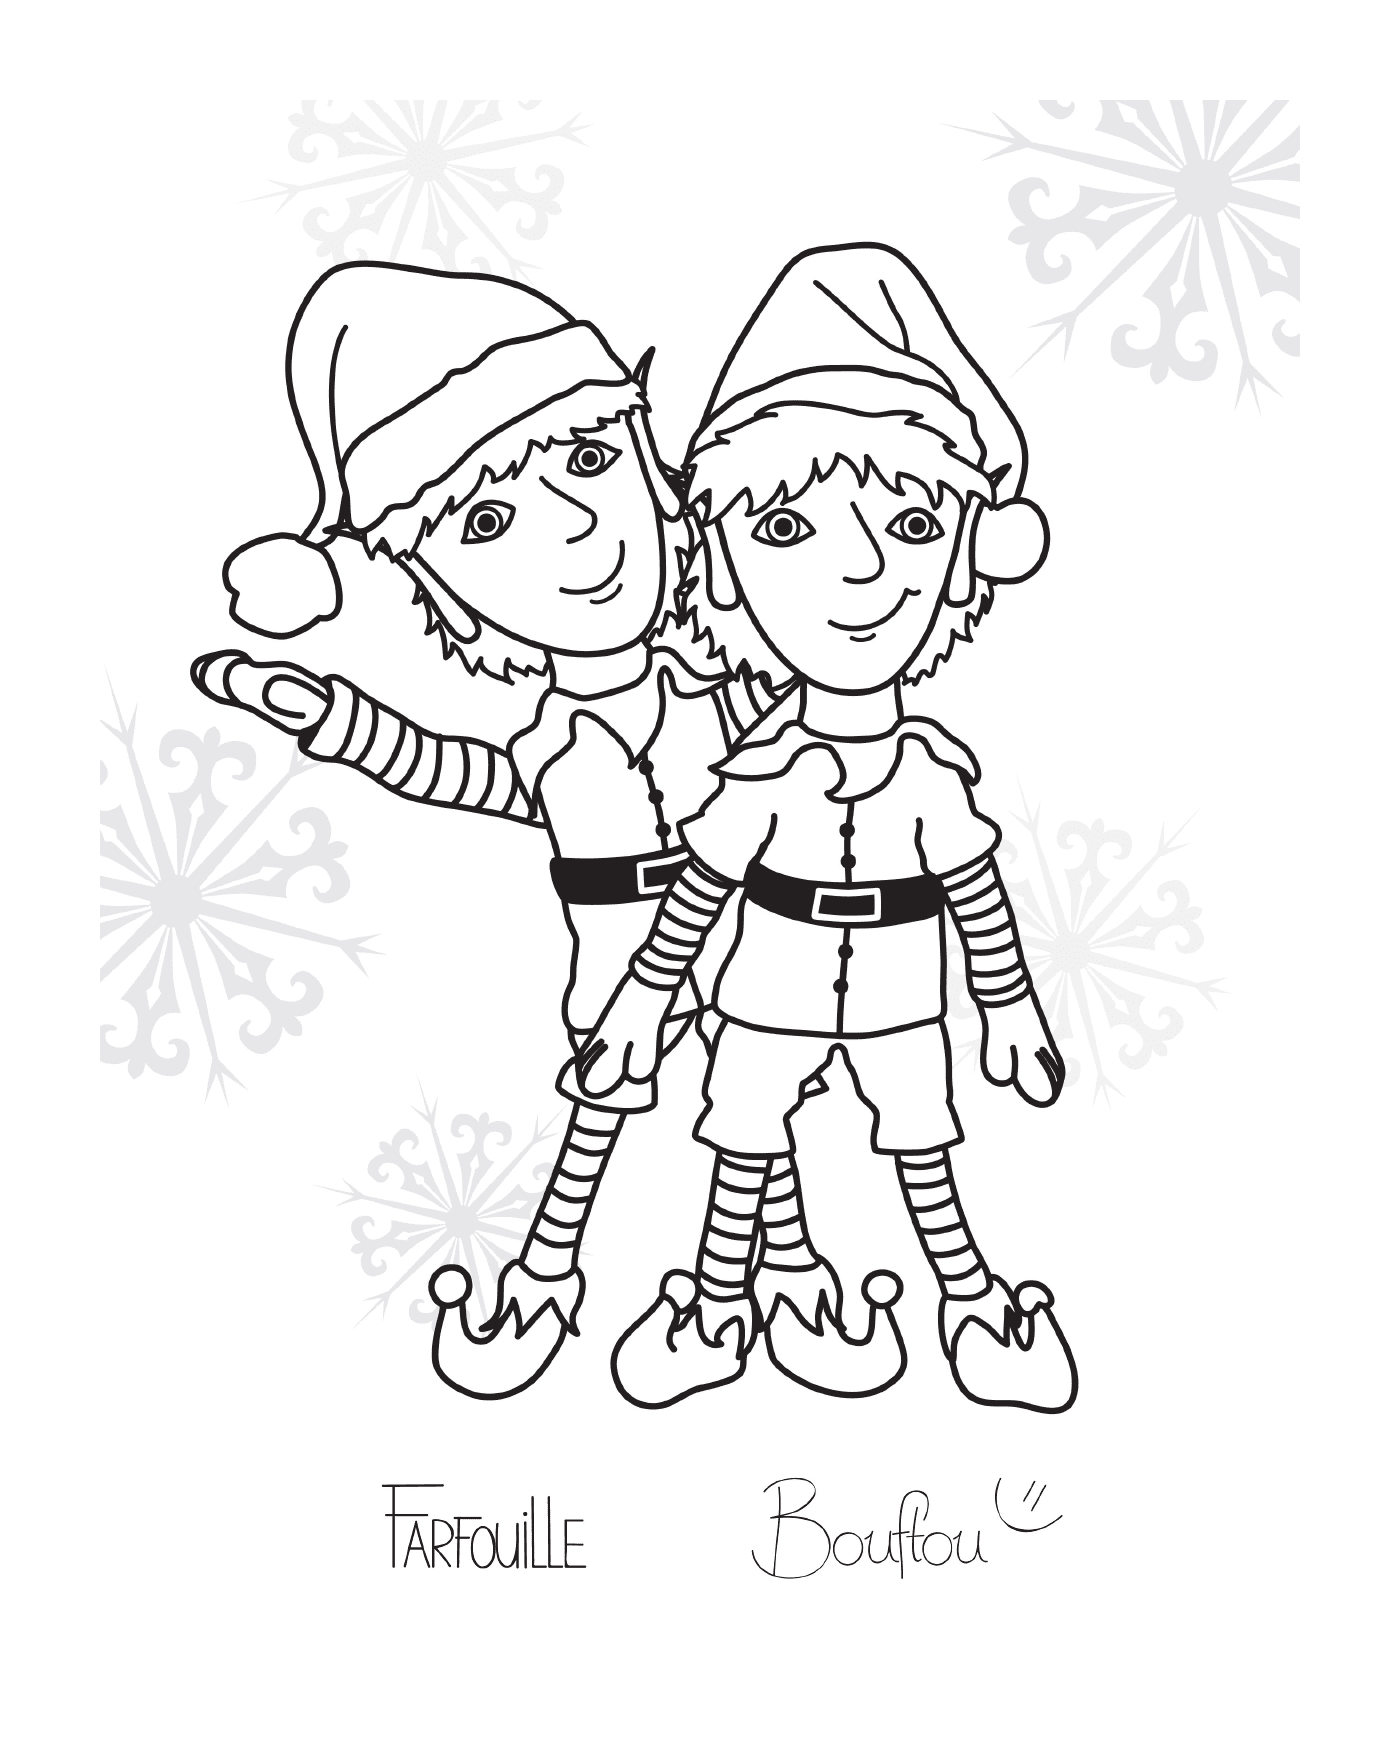  Two twin elves of Christmas 